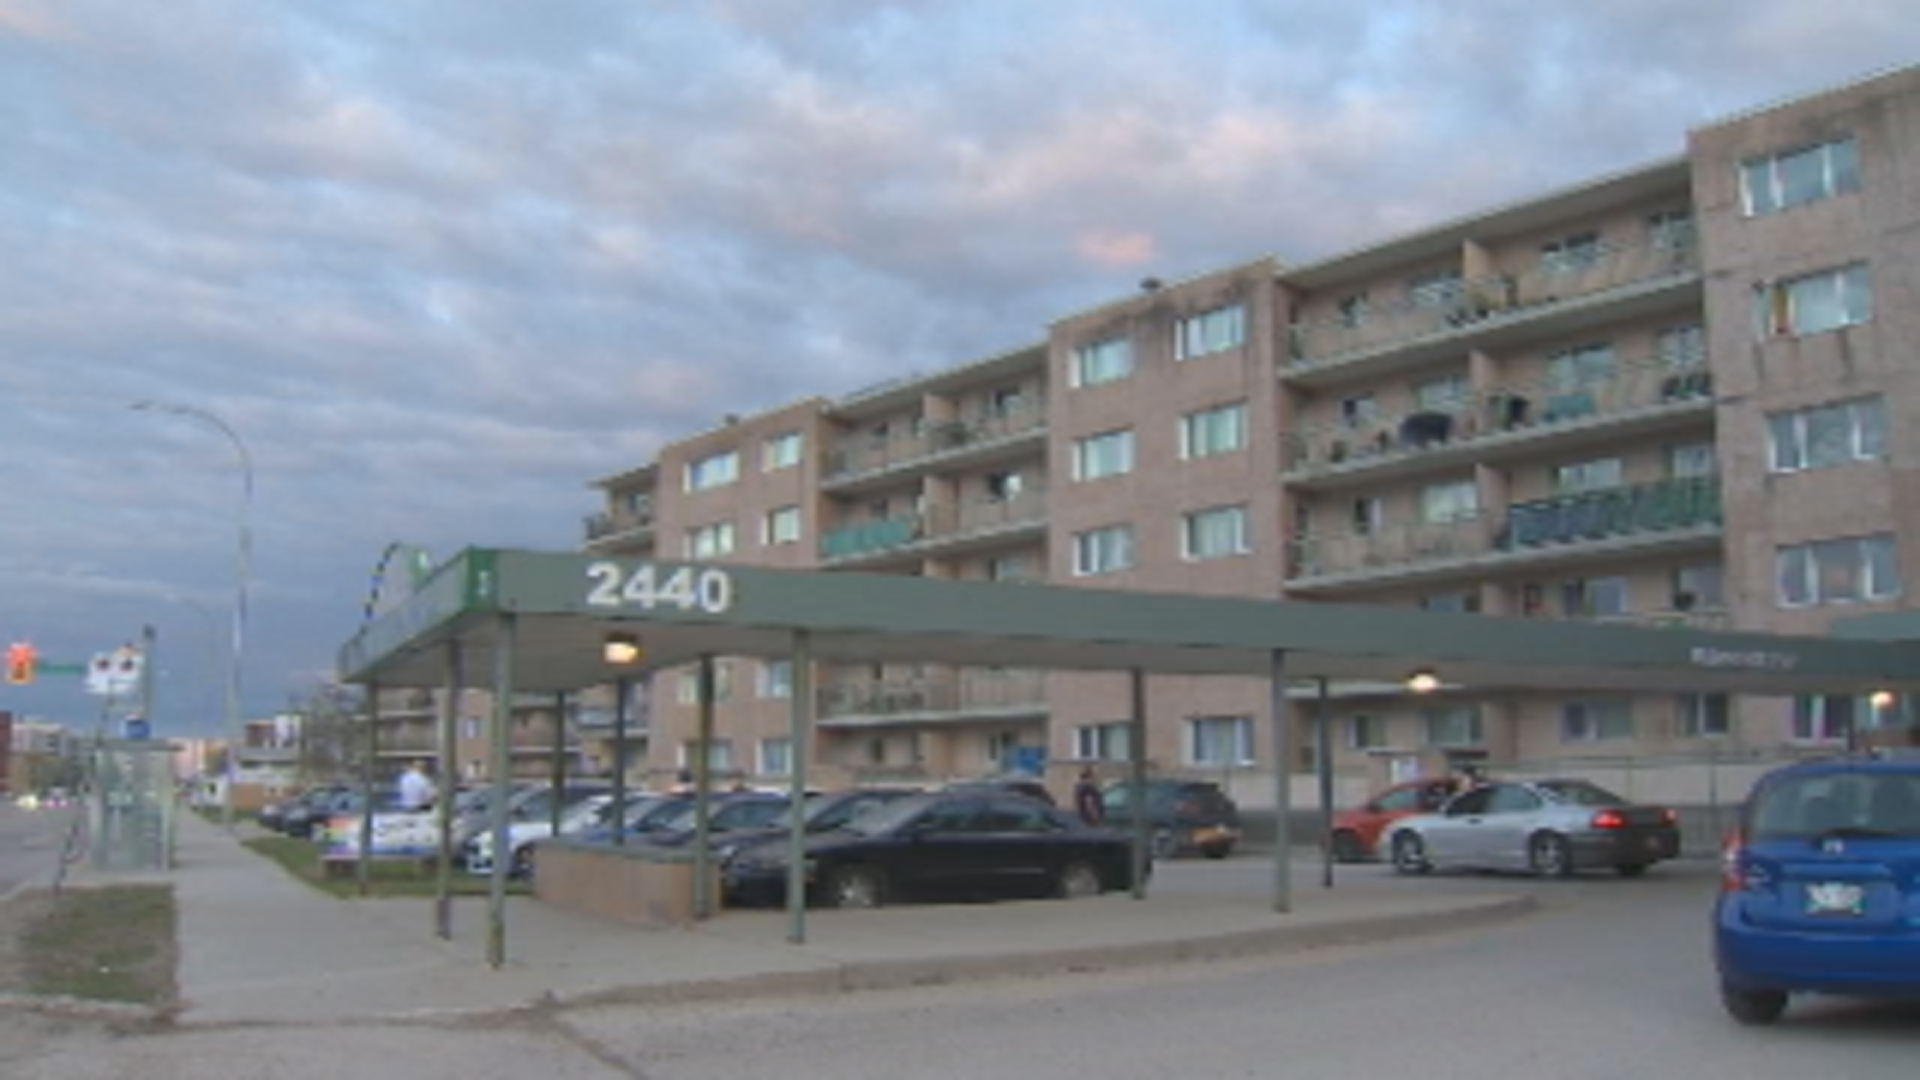 More than 200 residents at Birchwood Terrace in Winnipeg are going to be displaced all summer as structural issues in the building continue. .